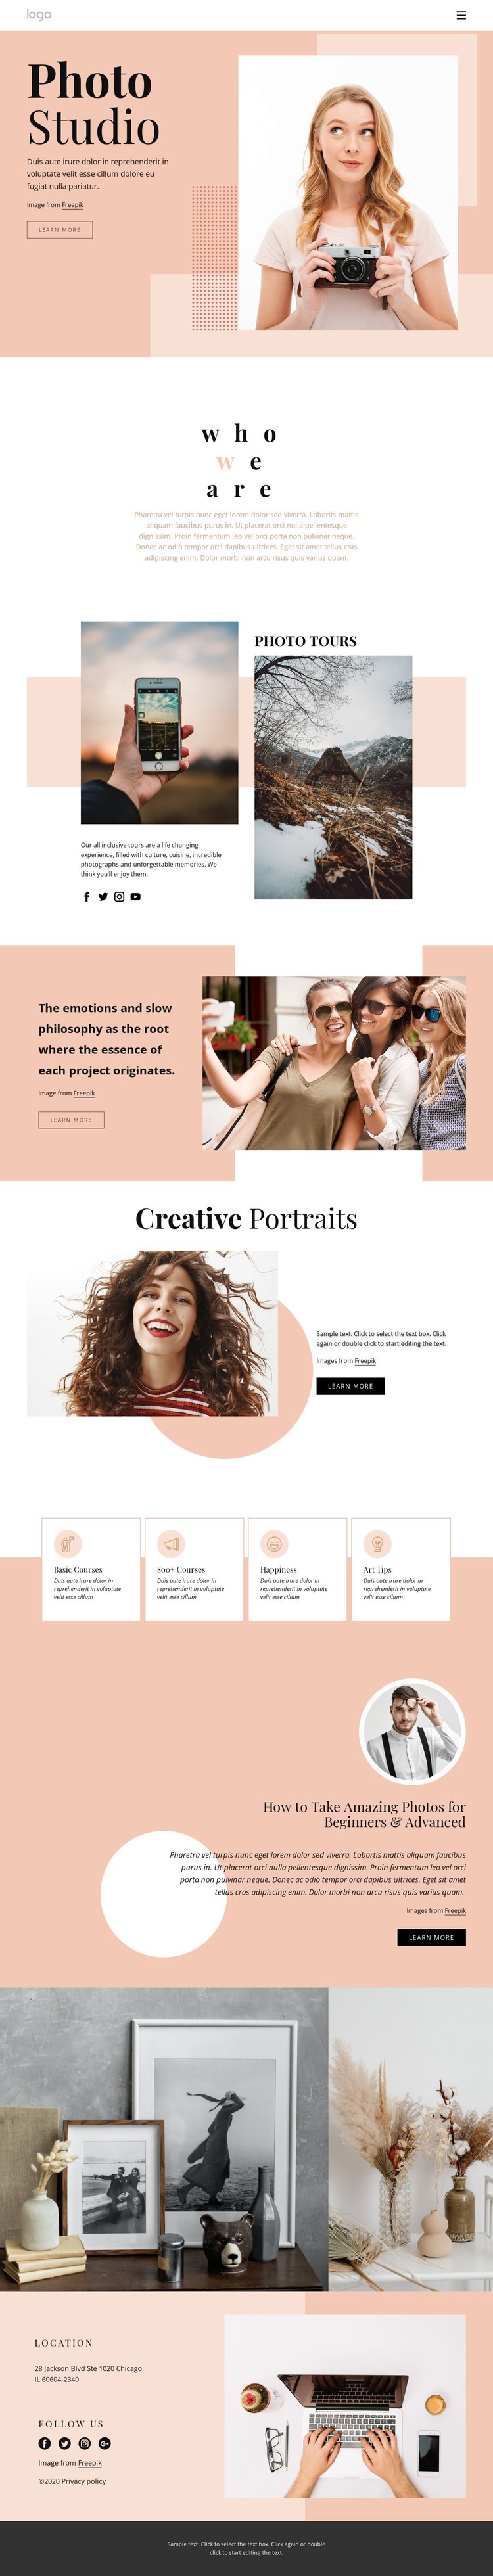 Photography courses Static Site Generator